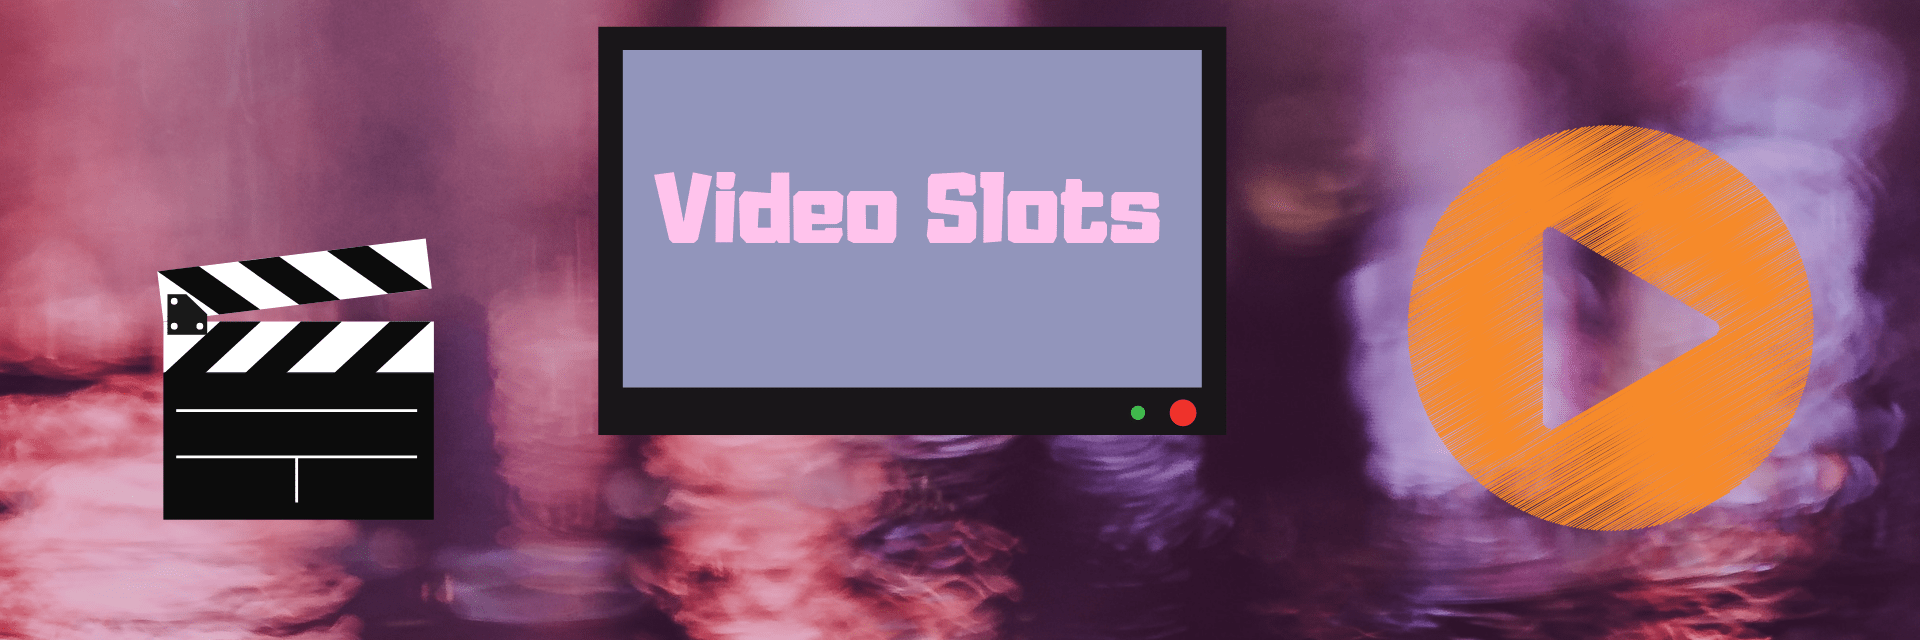 Video Slots background